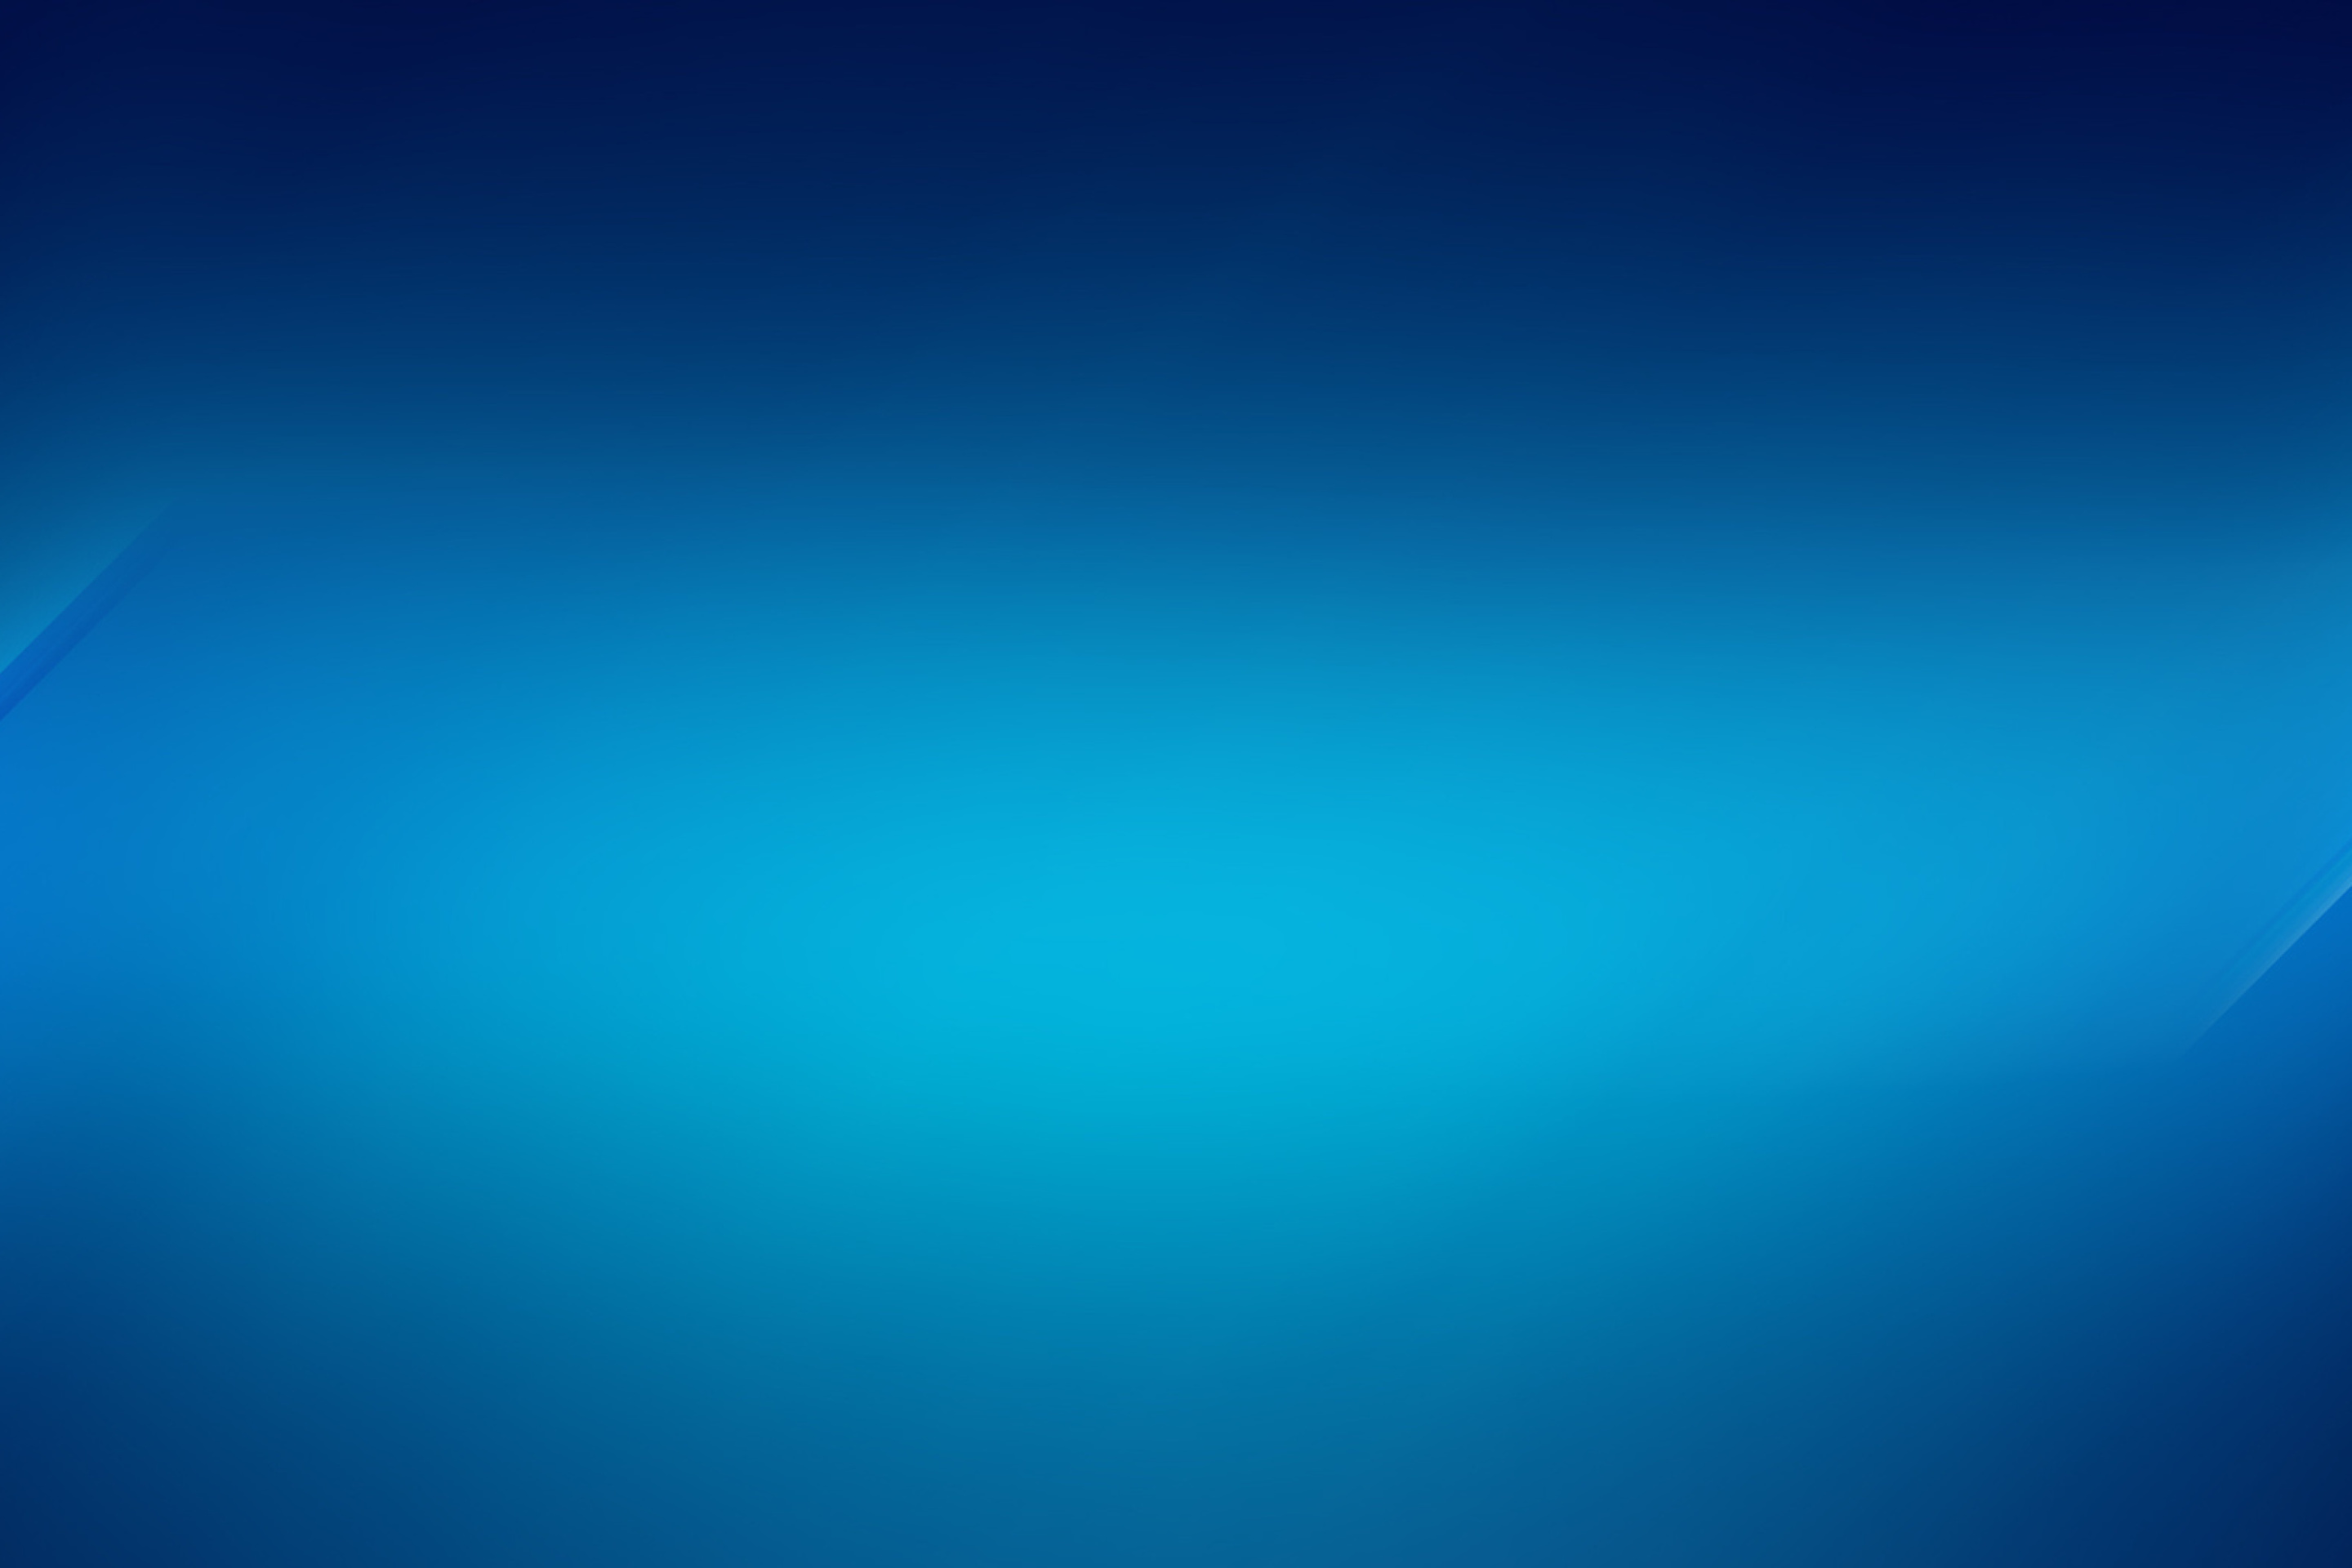 Blue Widescreen Background Wallpaper for Sony Xperia Z2 Tablet